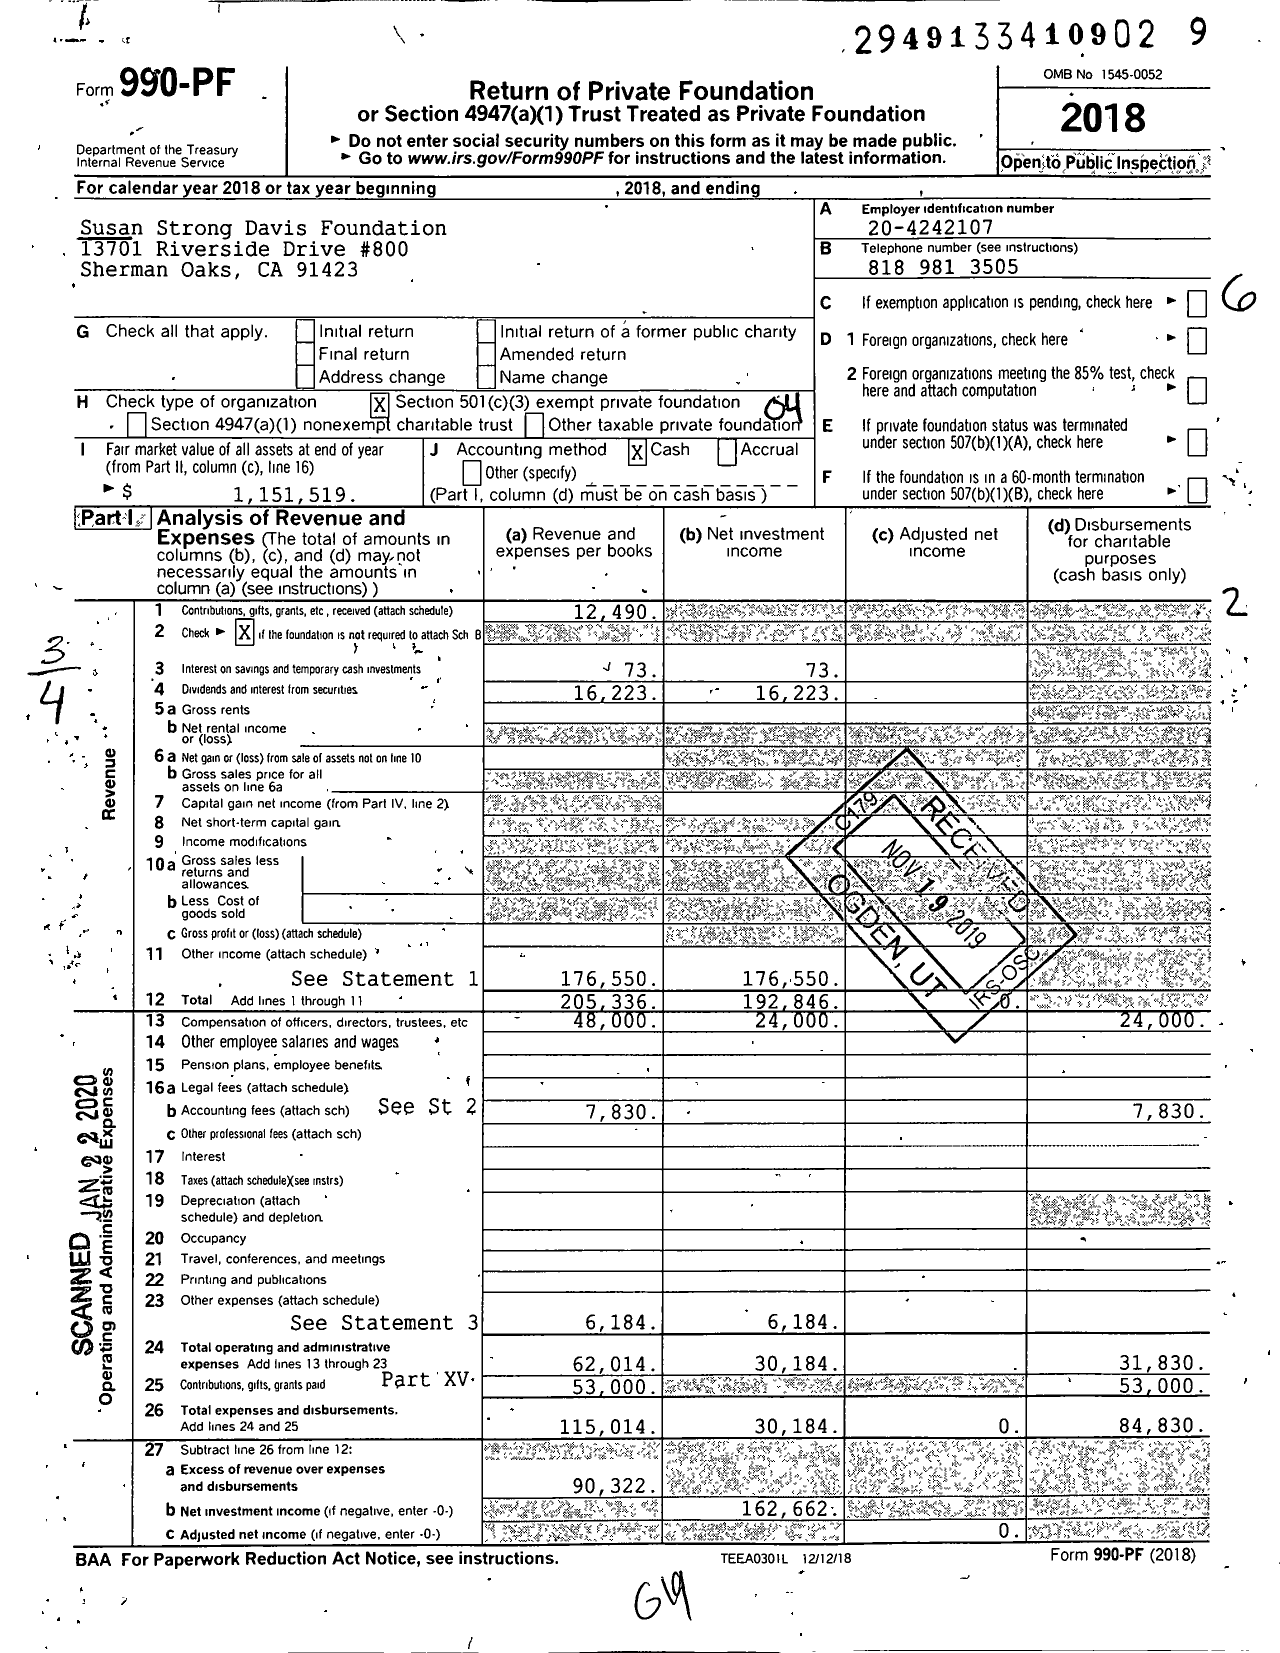 Image of first page of 2018 Form 990PF for Susan Strong Davis Foundation